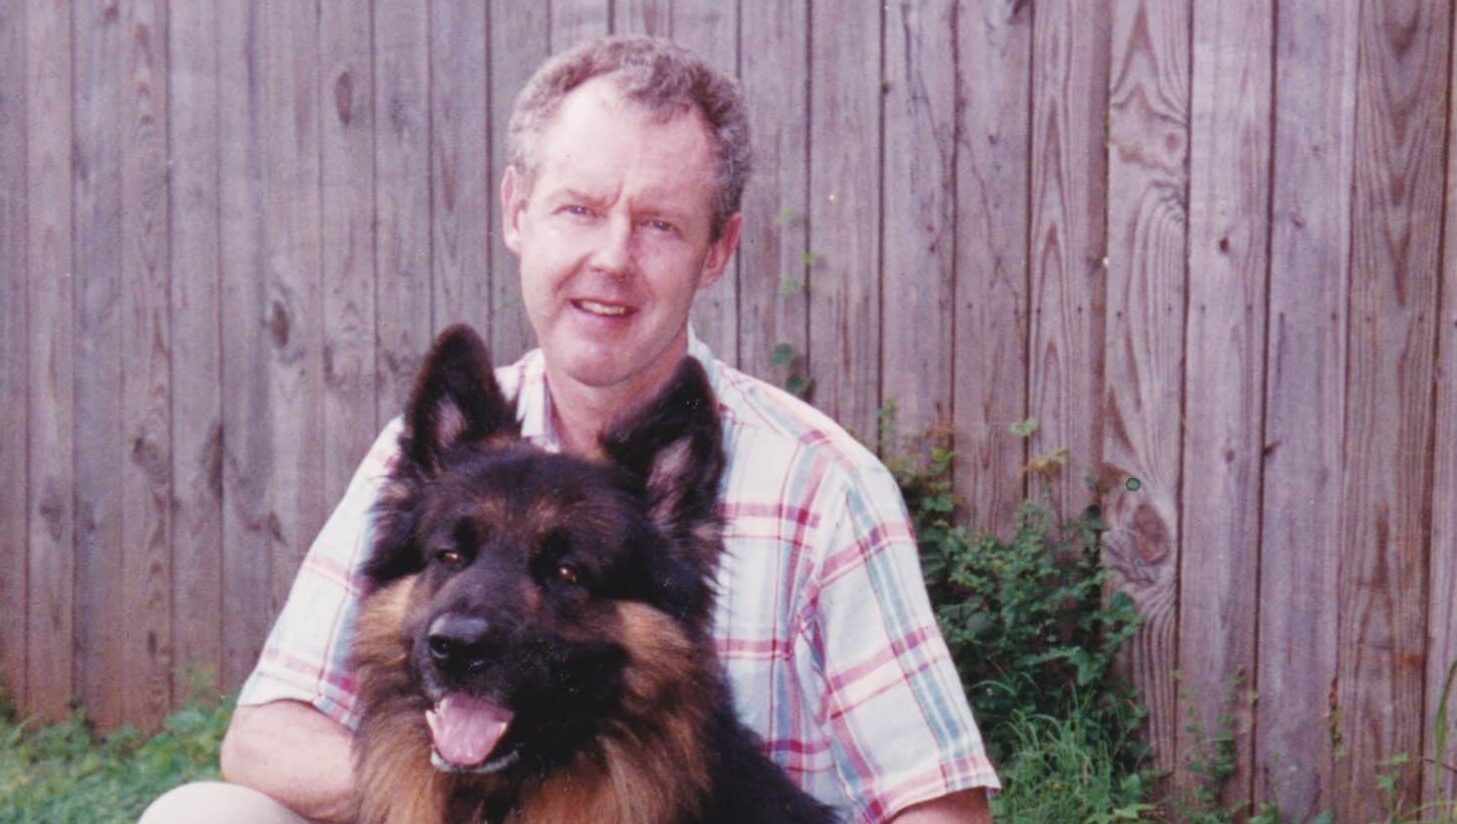 Alumnus John McRary with one of his dogs